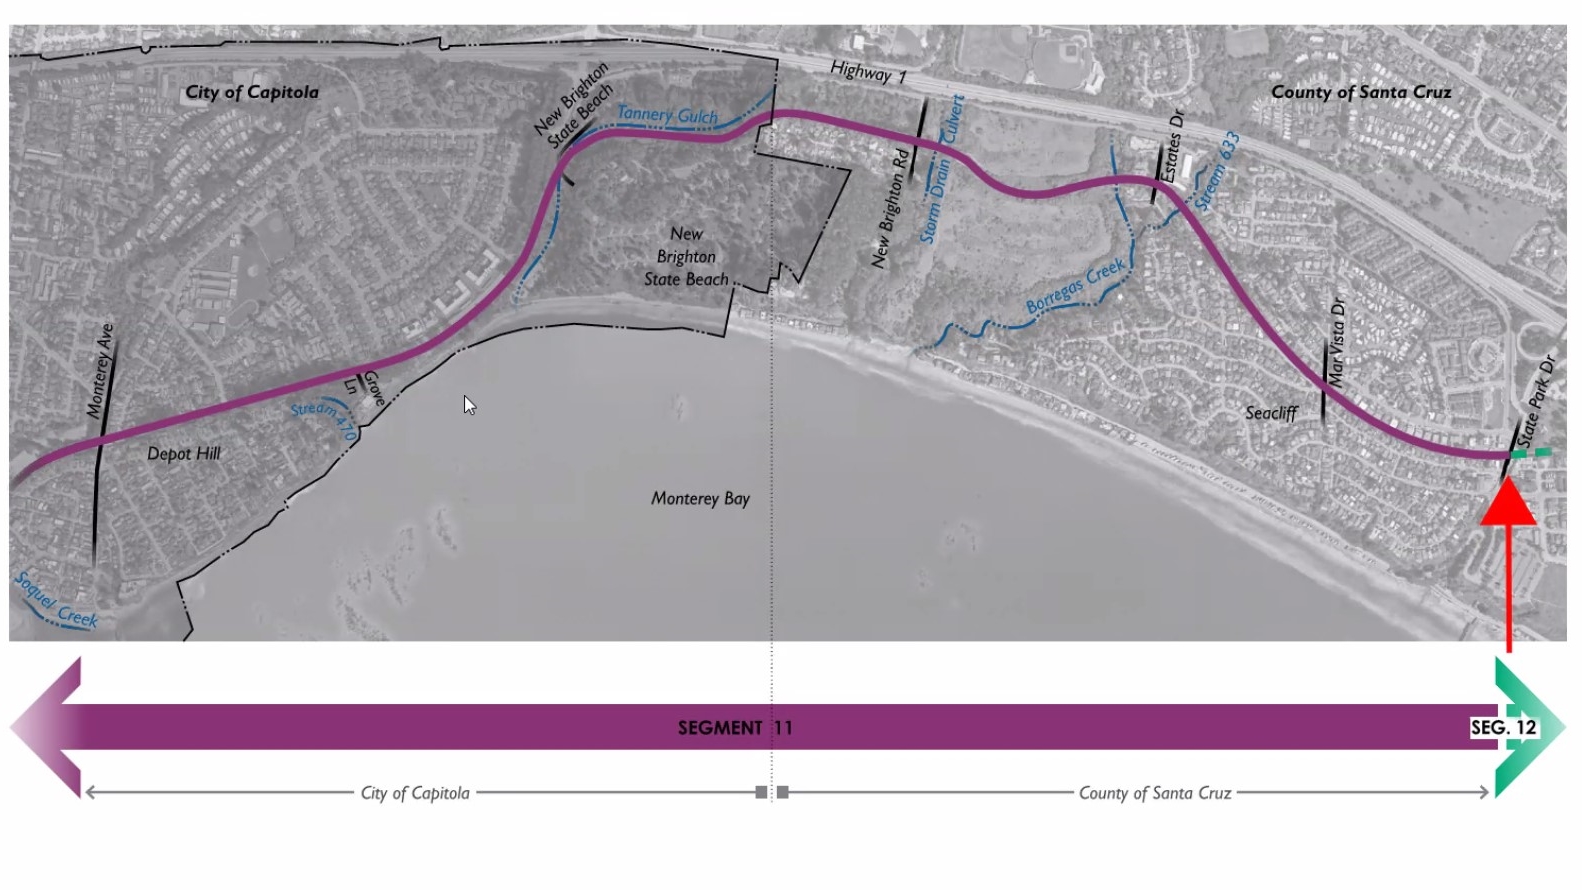 A map shows Segment 11 of the Coastal Rail Trail in Capitola and Seacliff.